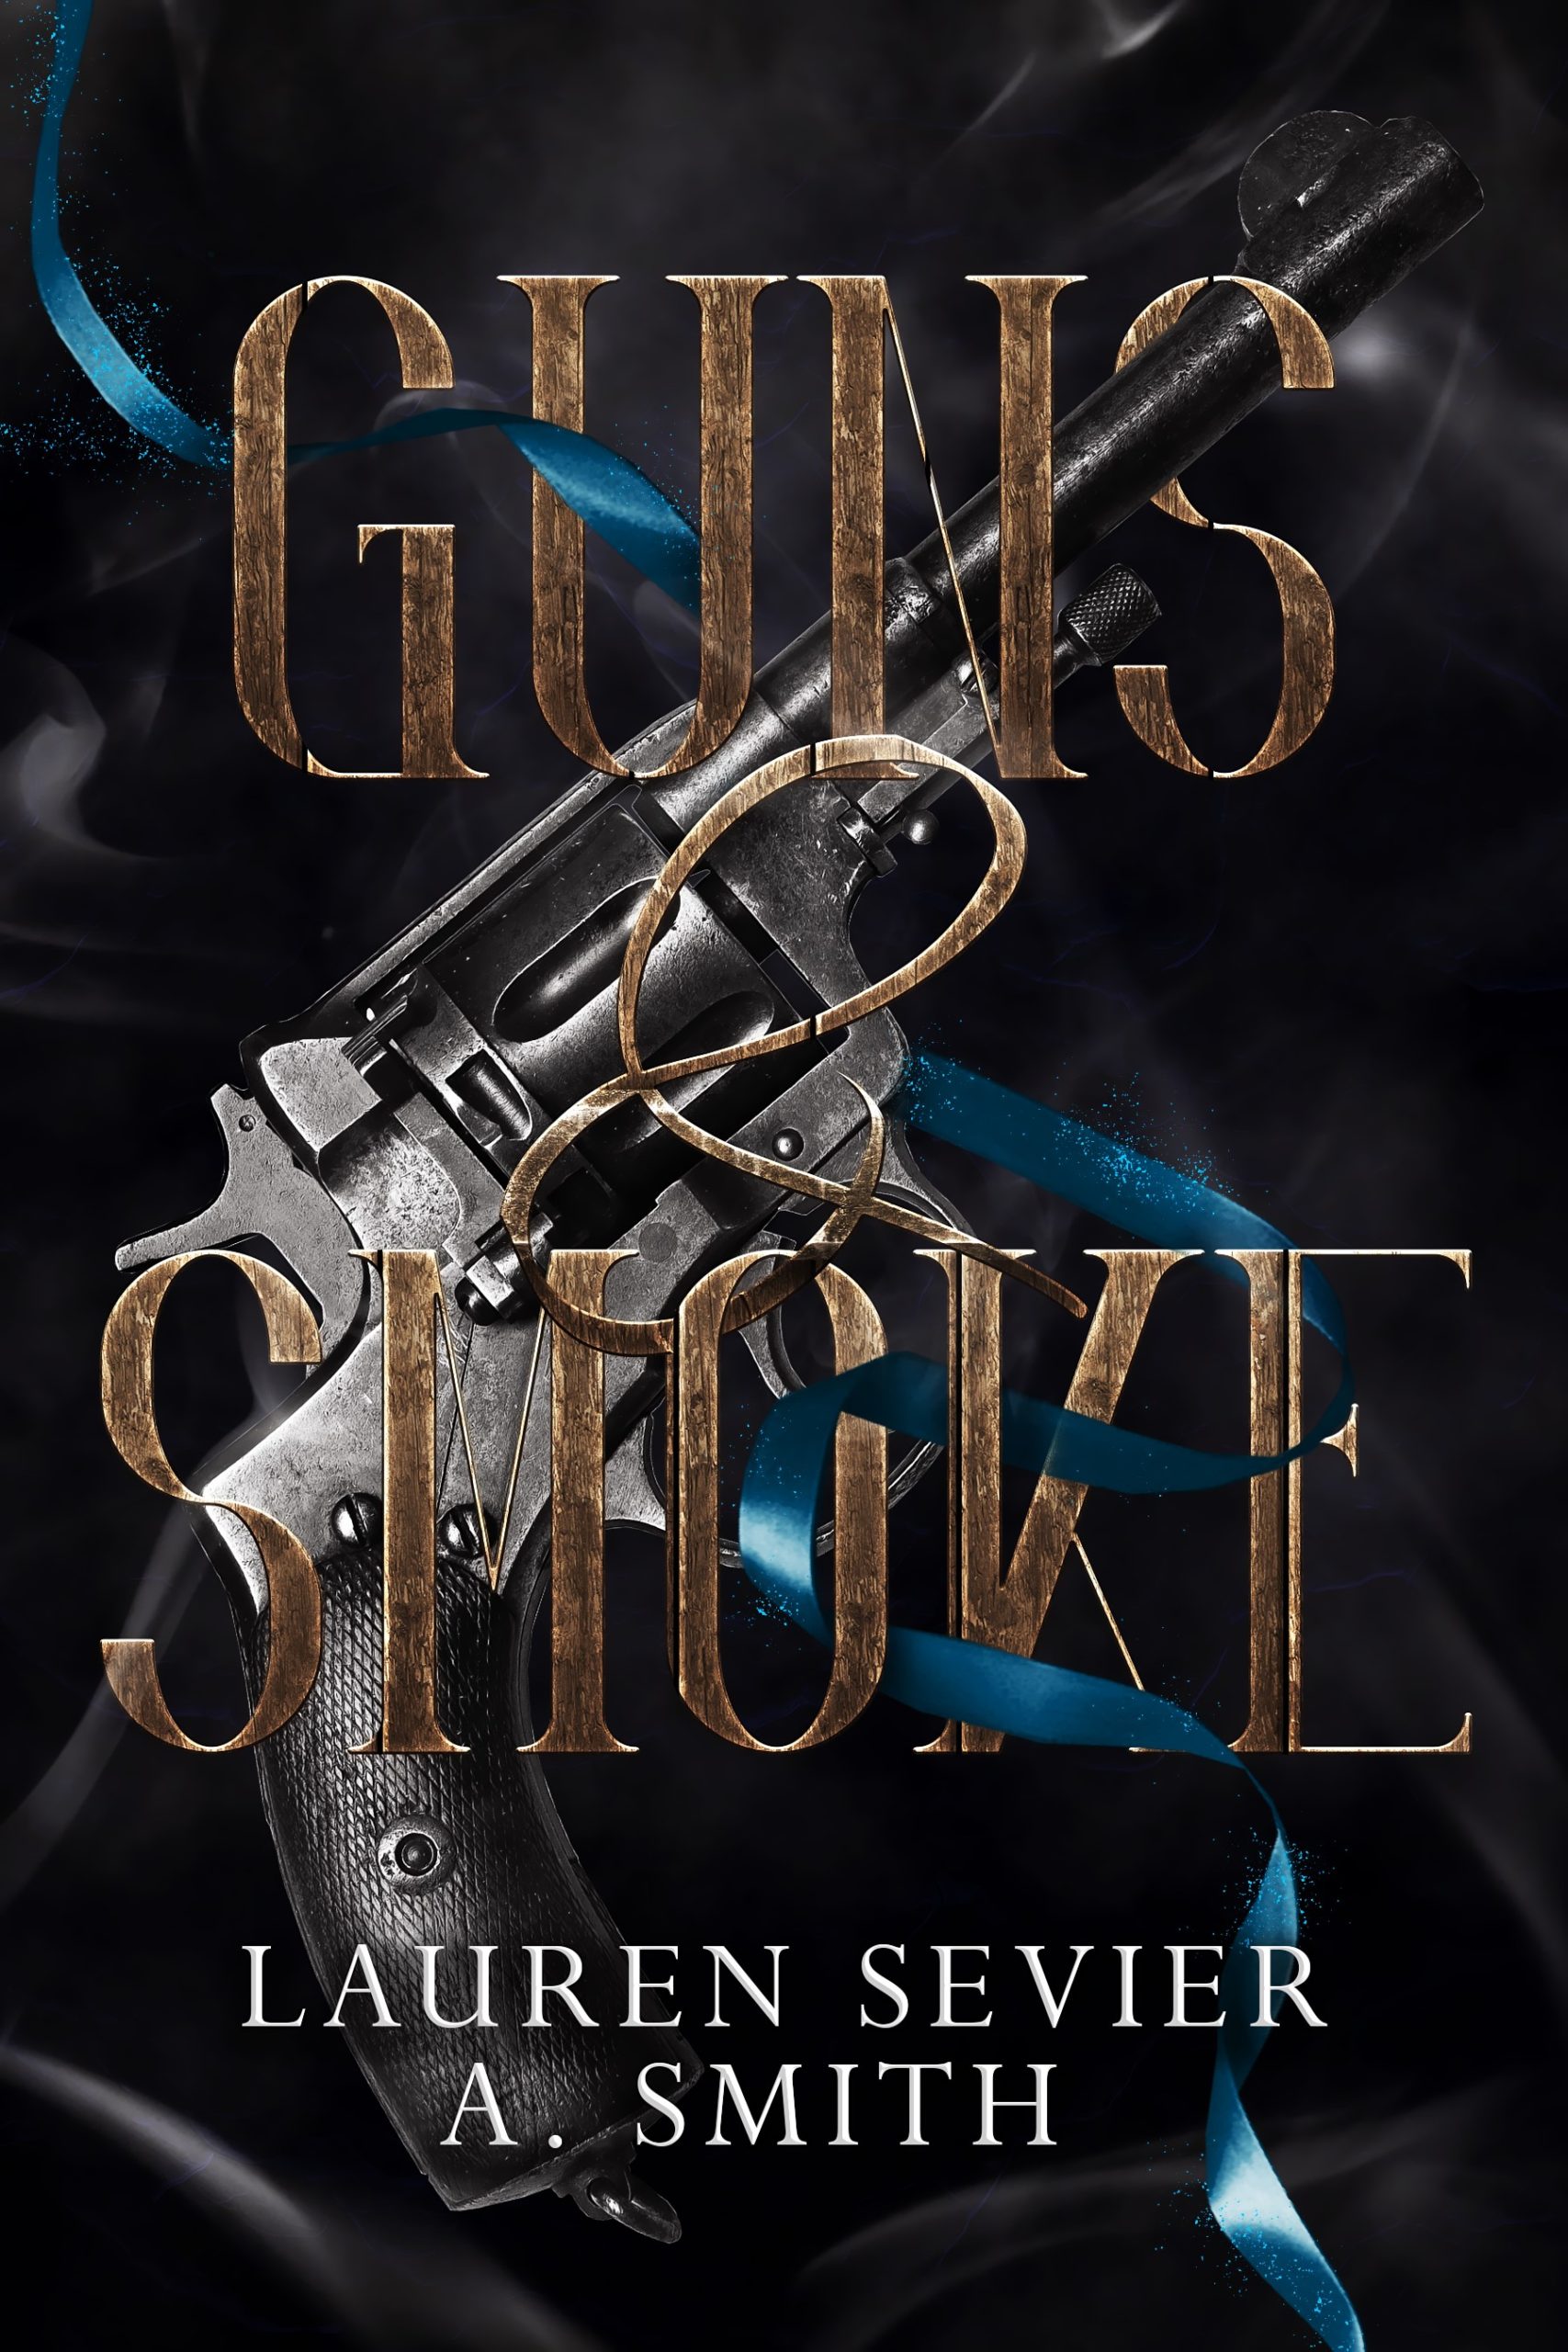 Guns & Smoke by Lauren Sevier and A. Smith